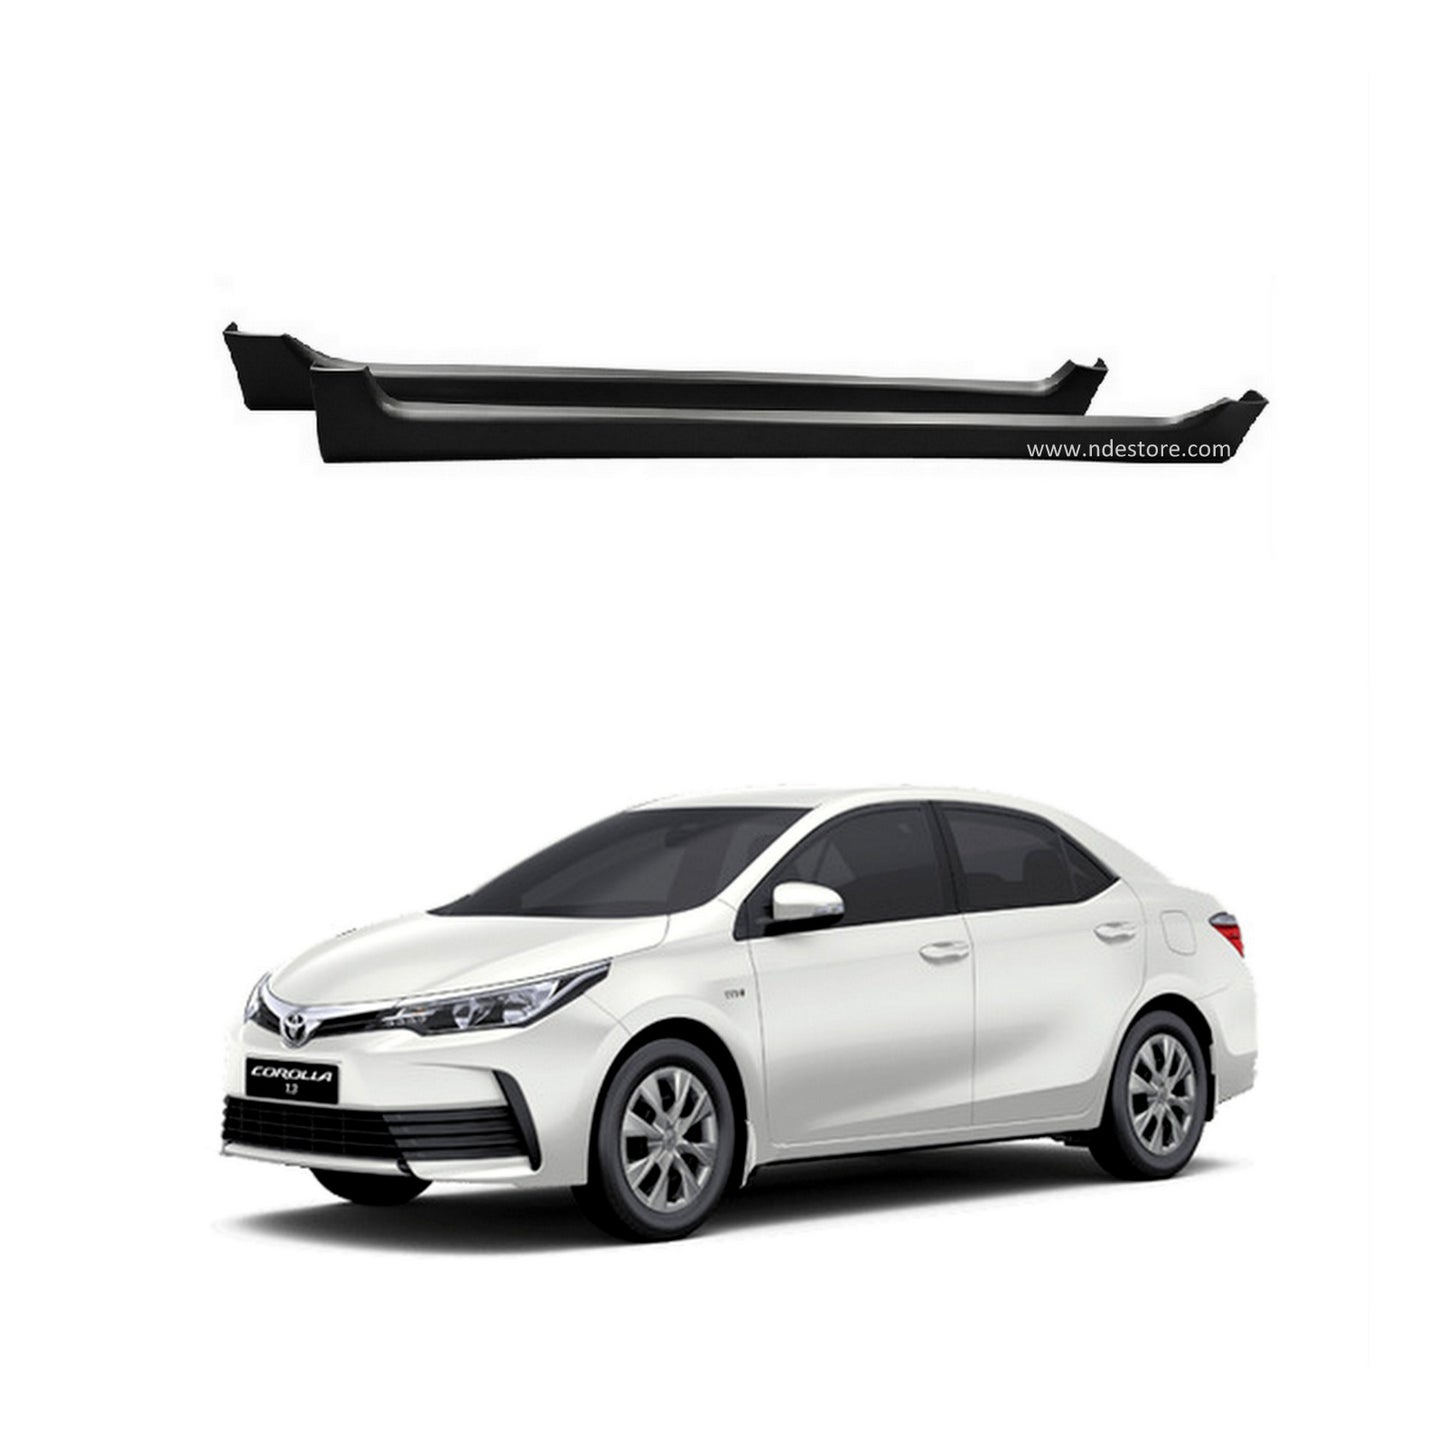 SIDE SKIRT, LOWER DOOR PANNEL BODY KIT ACCESSORIES FOR TOYOTA COROLLA